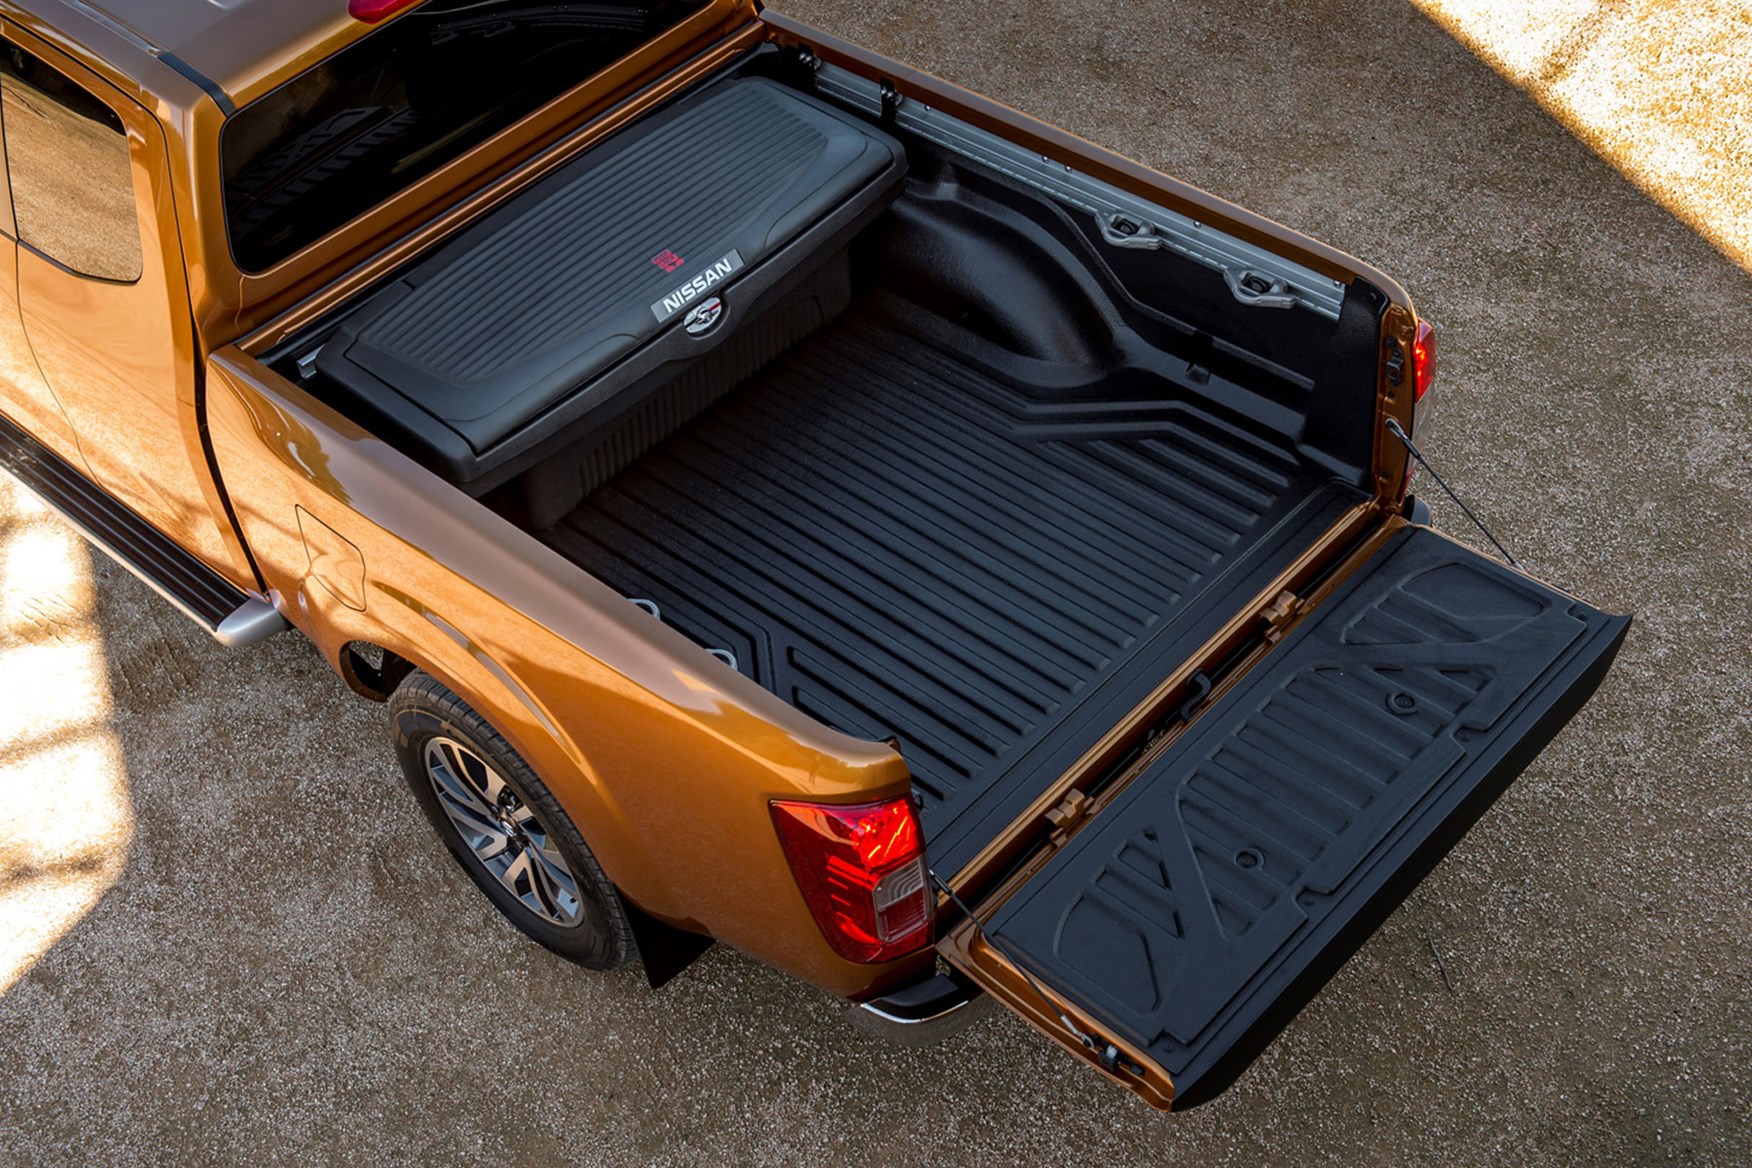 Nissan Navara top-down view of load bed with tailgate lowered, orange